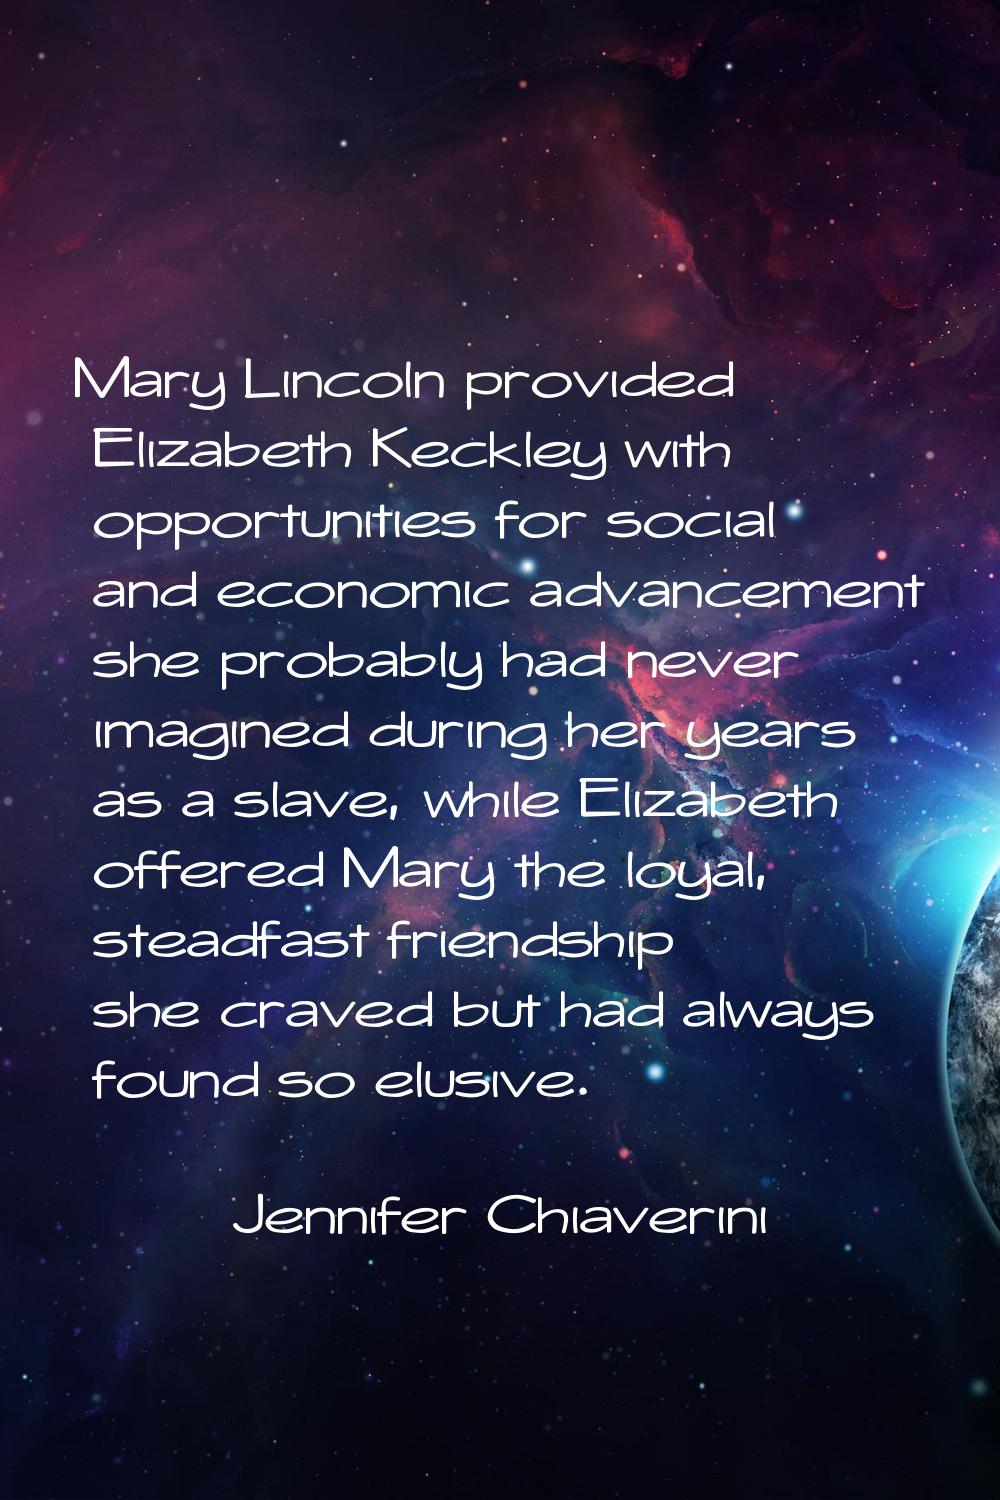 Mary Lincoln provided Elizabeth Keckley with opportunities for social and economic advancement she 